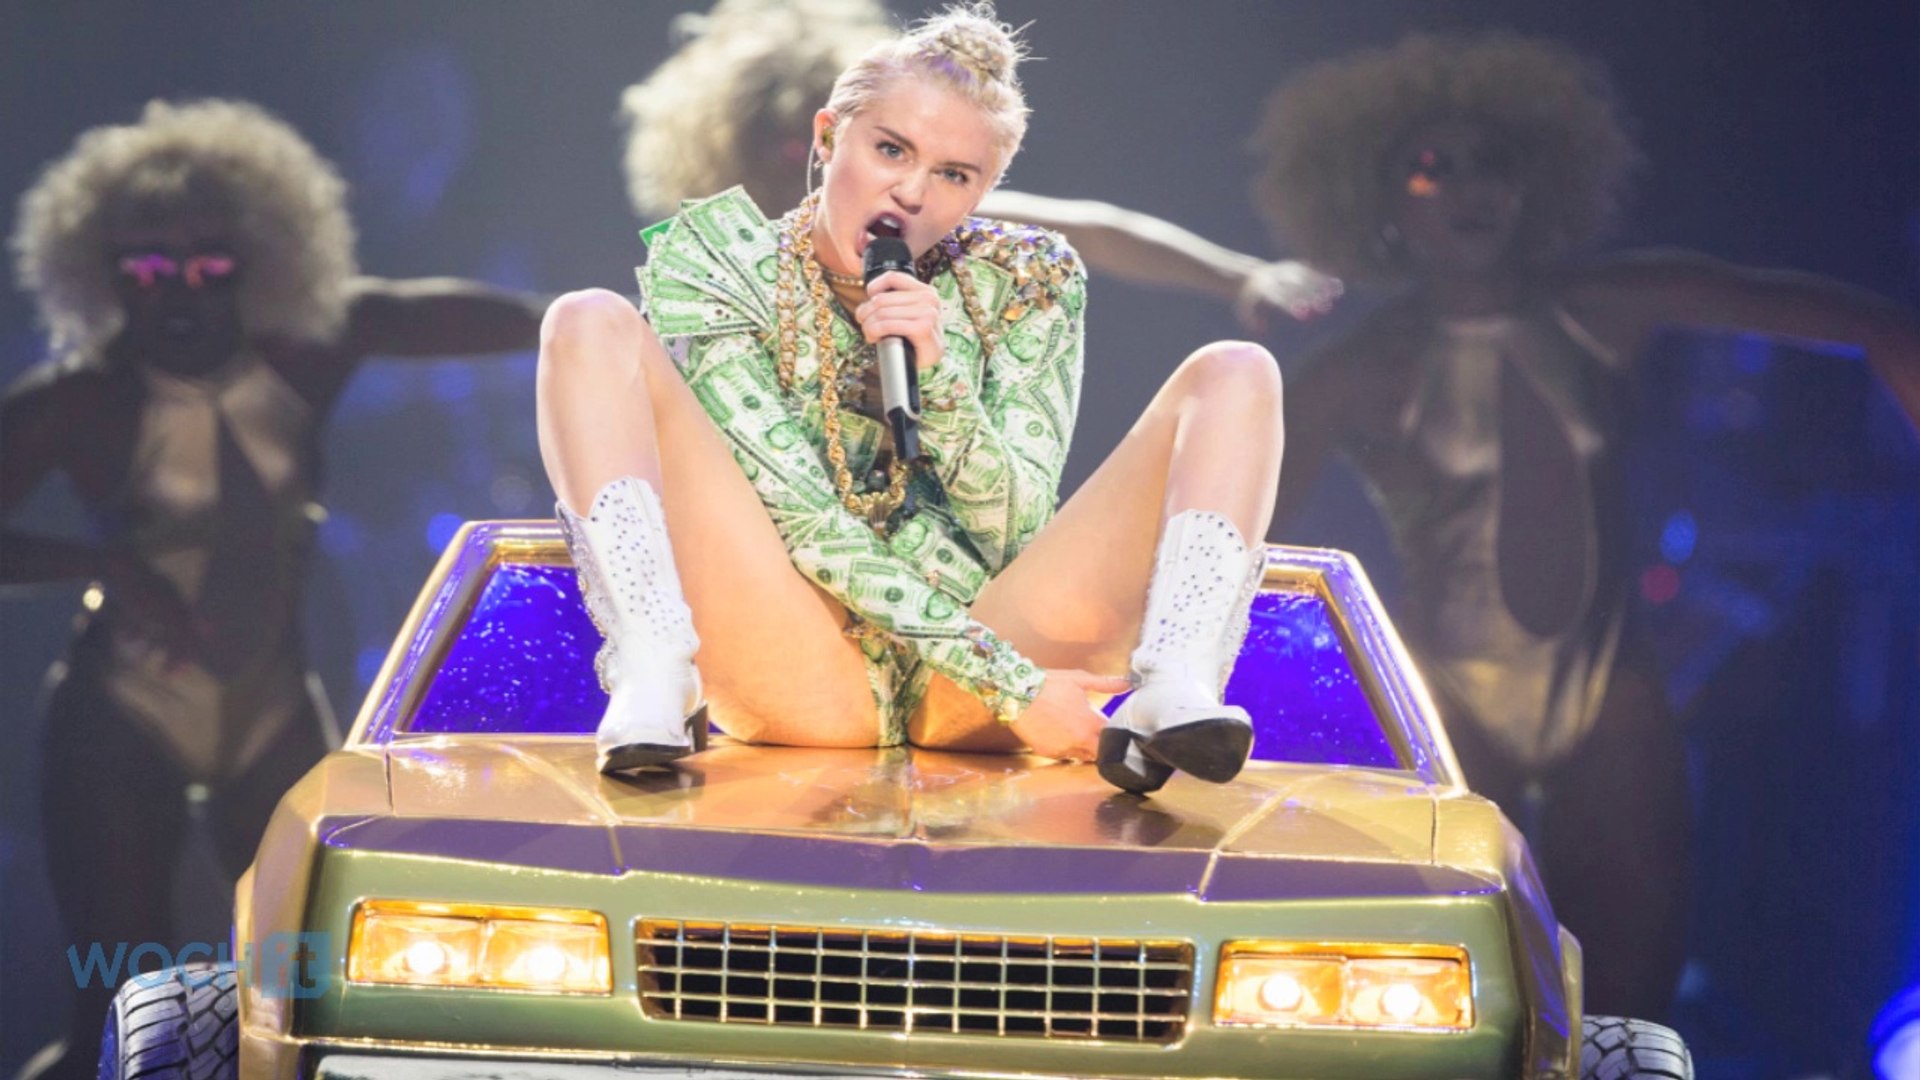 Miley Cyrus' BANGERZ Special Has Got NBC In Hot Water With The FCC! What Did They Expect?